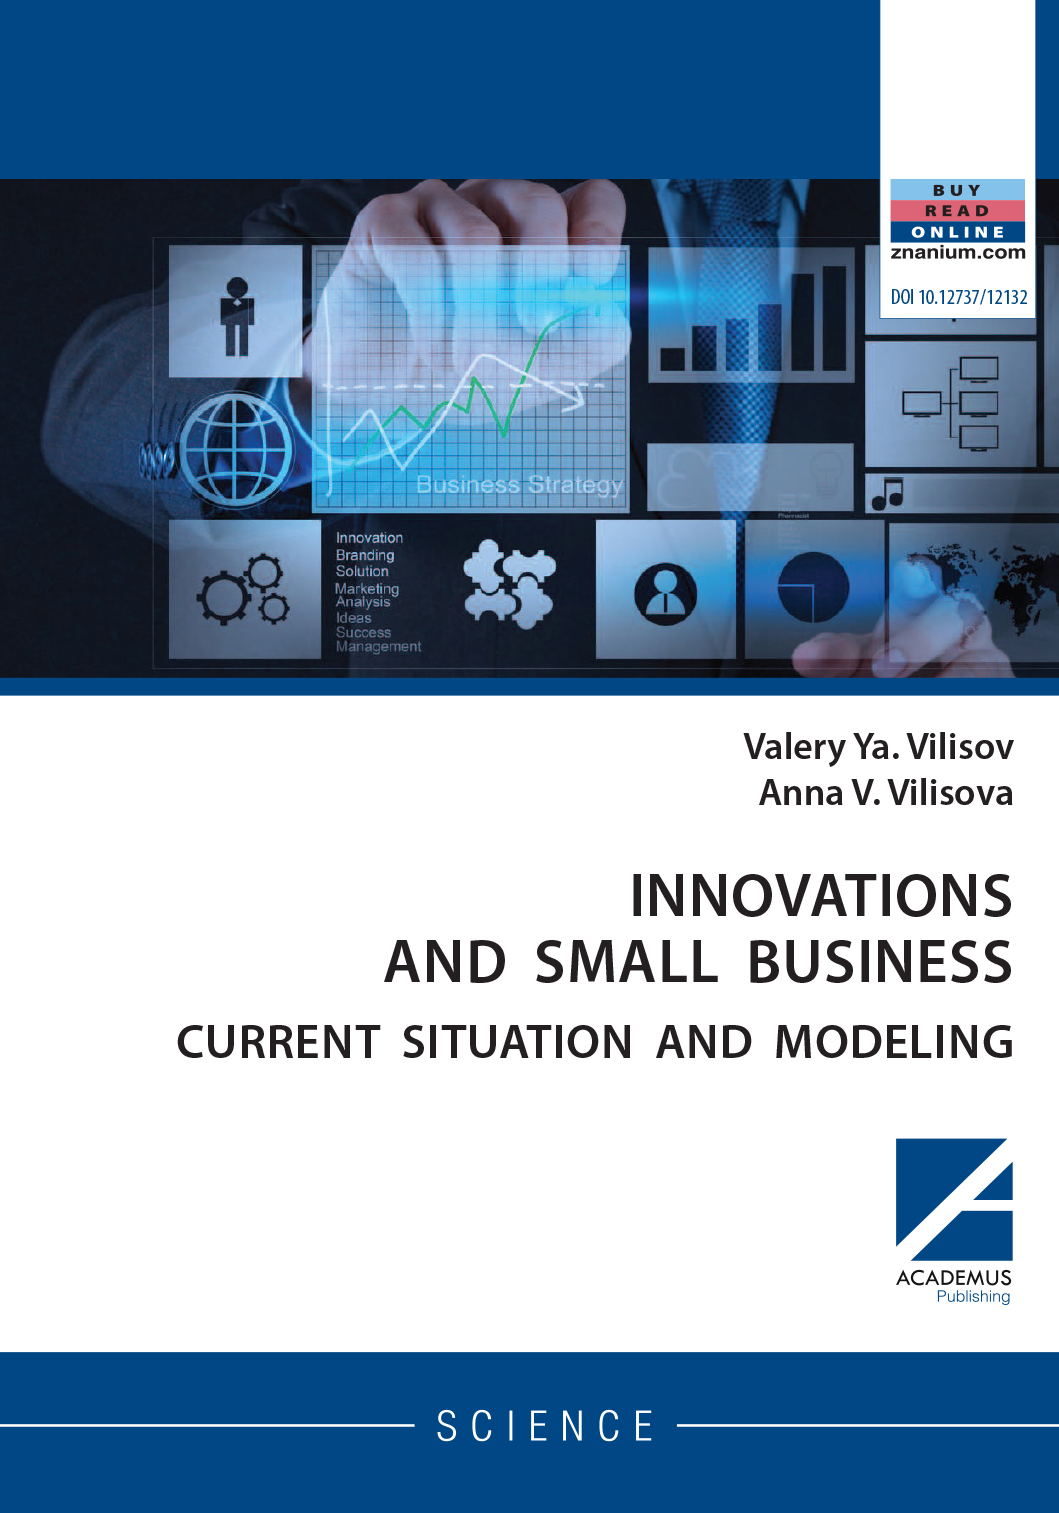                         INNOVATIONS AND SMALL BUSINESS: Current situation and modeling
            